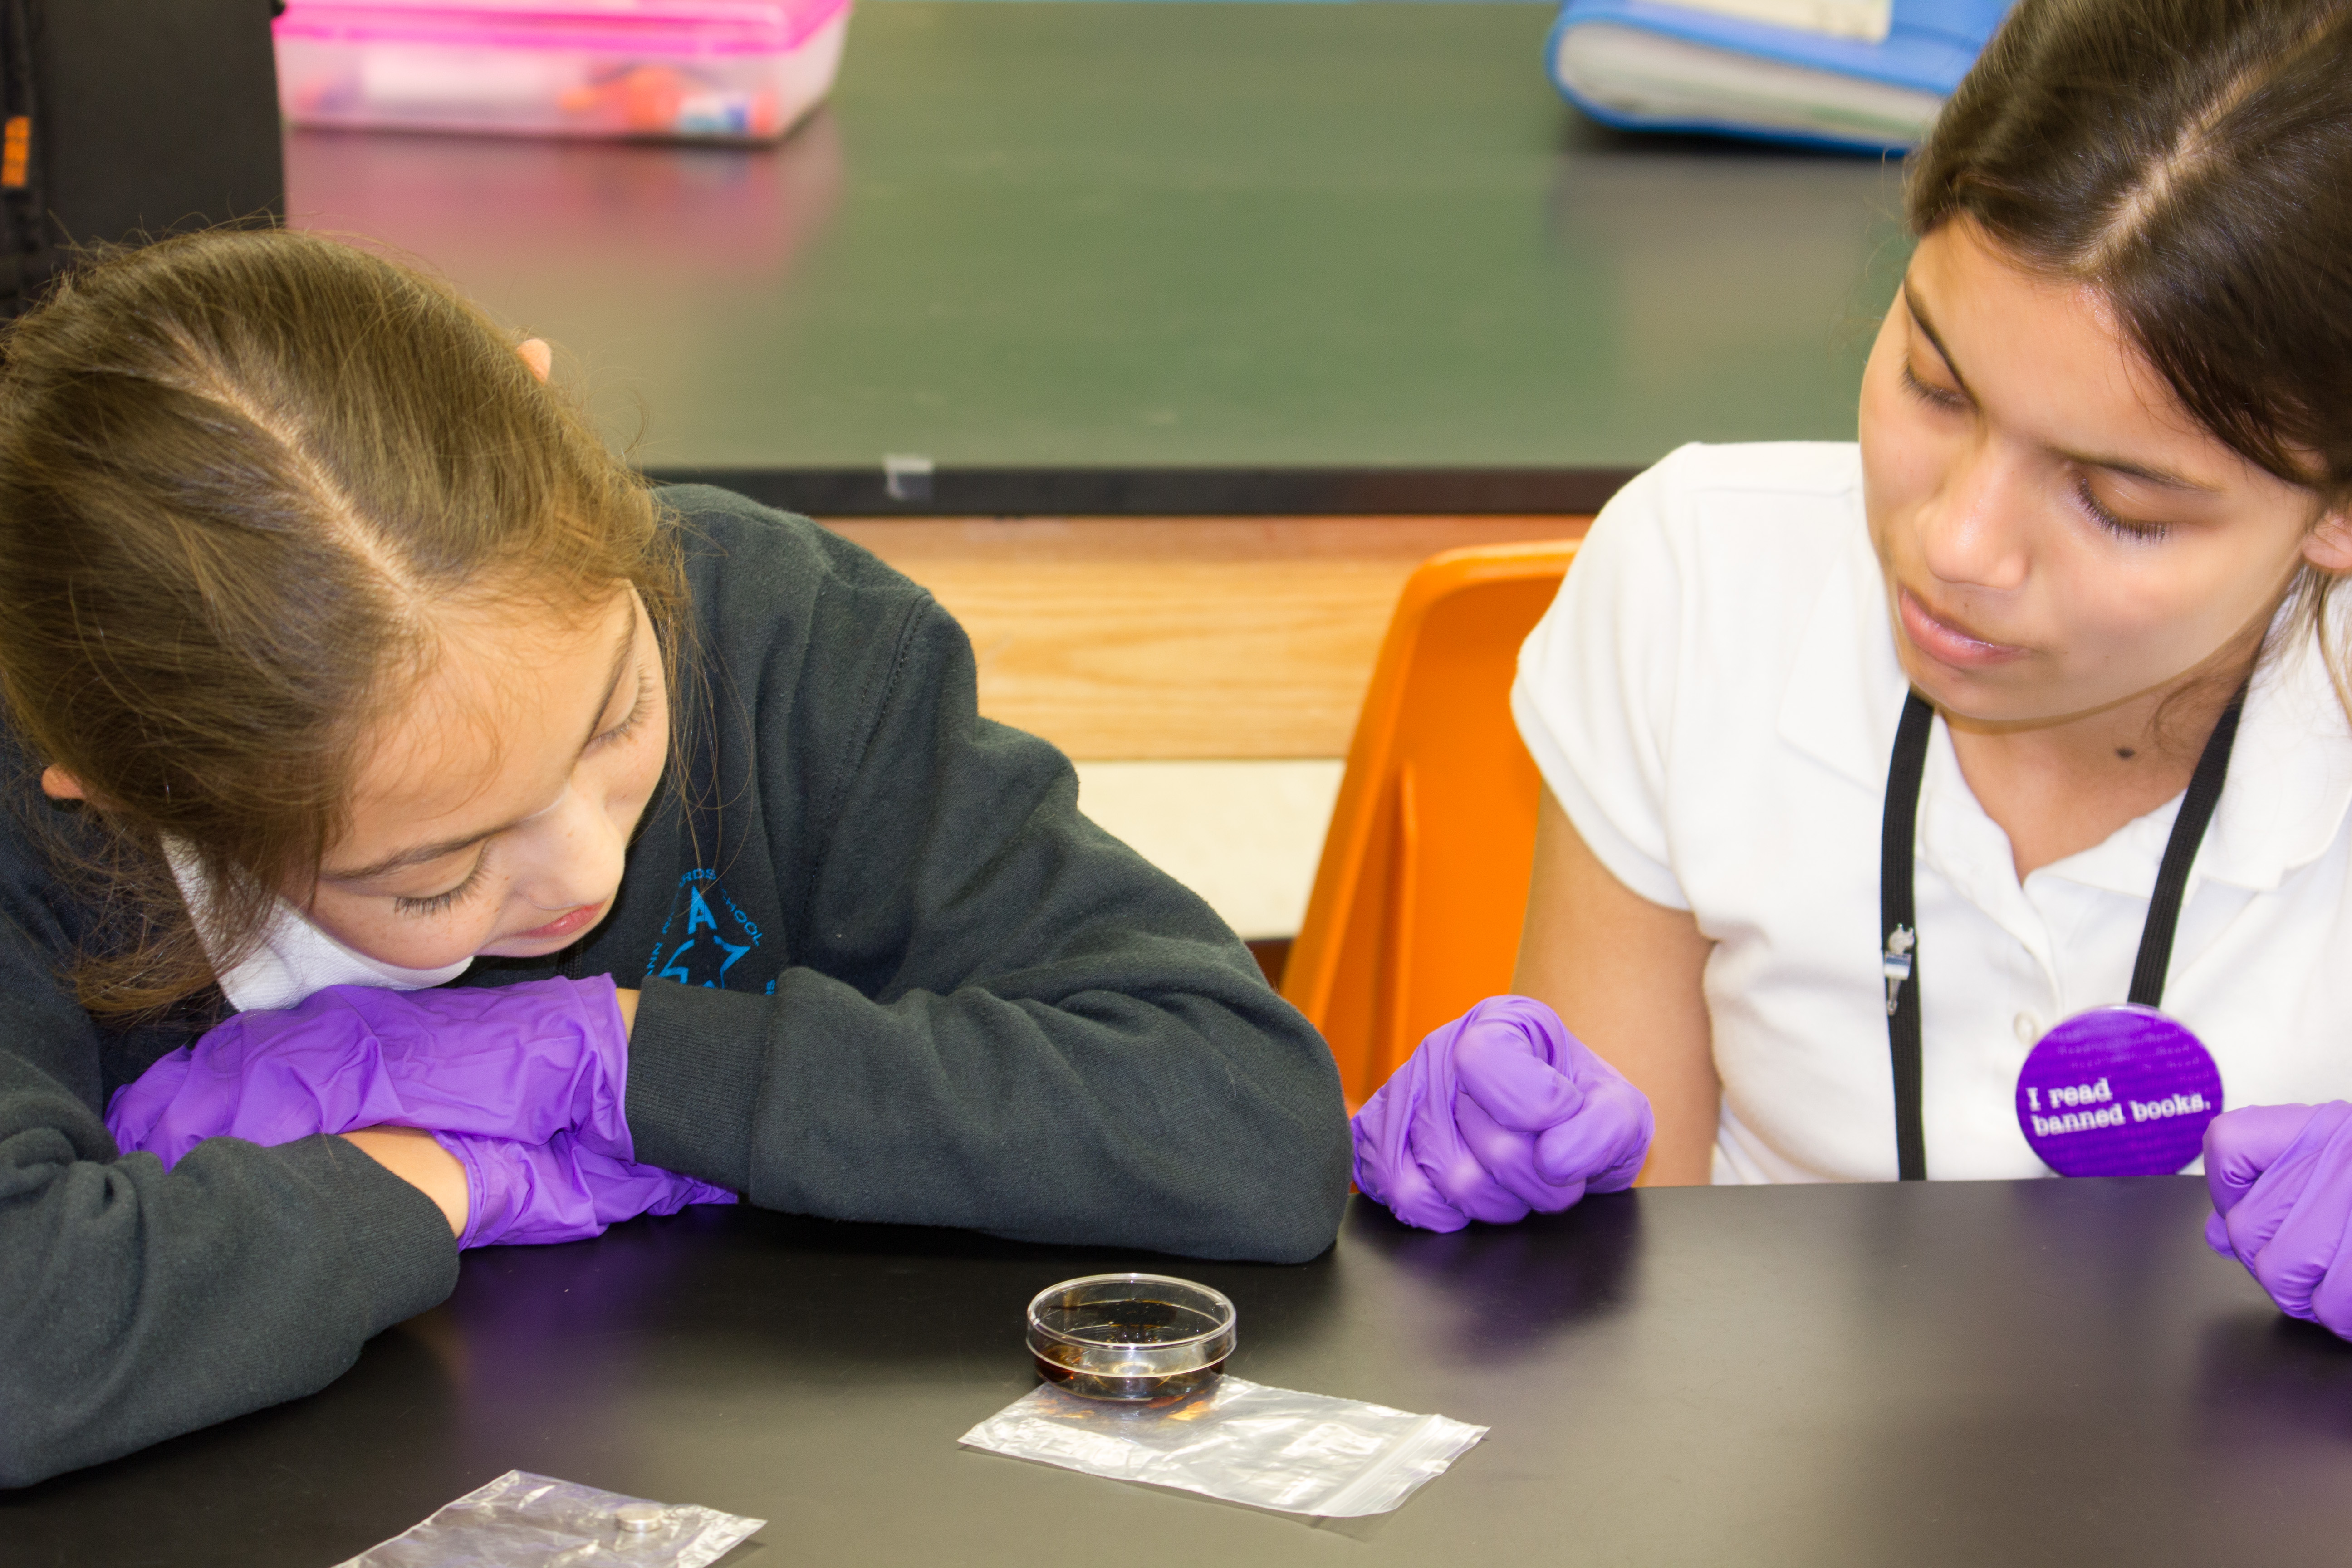 Two female middle school students are sitting at a table contemplating a science experiment they are conducting. The science experiment sits in a petri dish in front of them and they are wearing purple latex gloves.